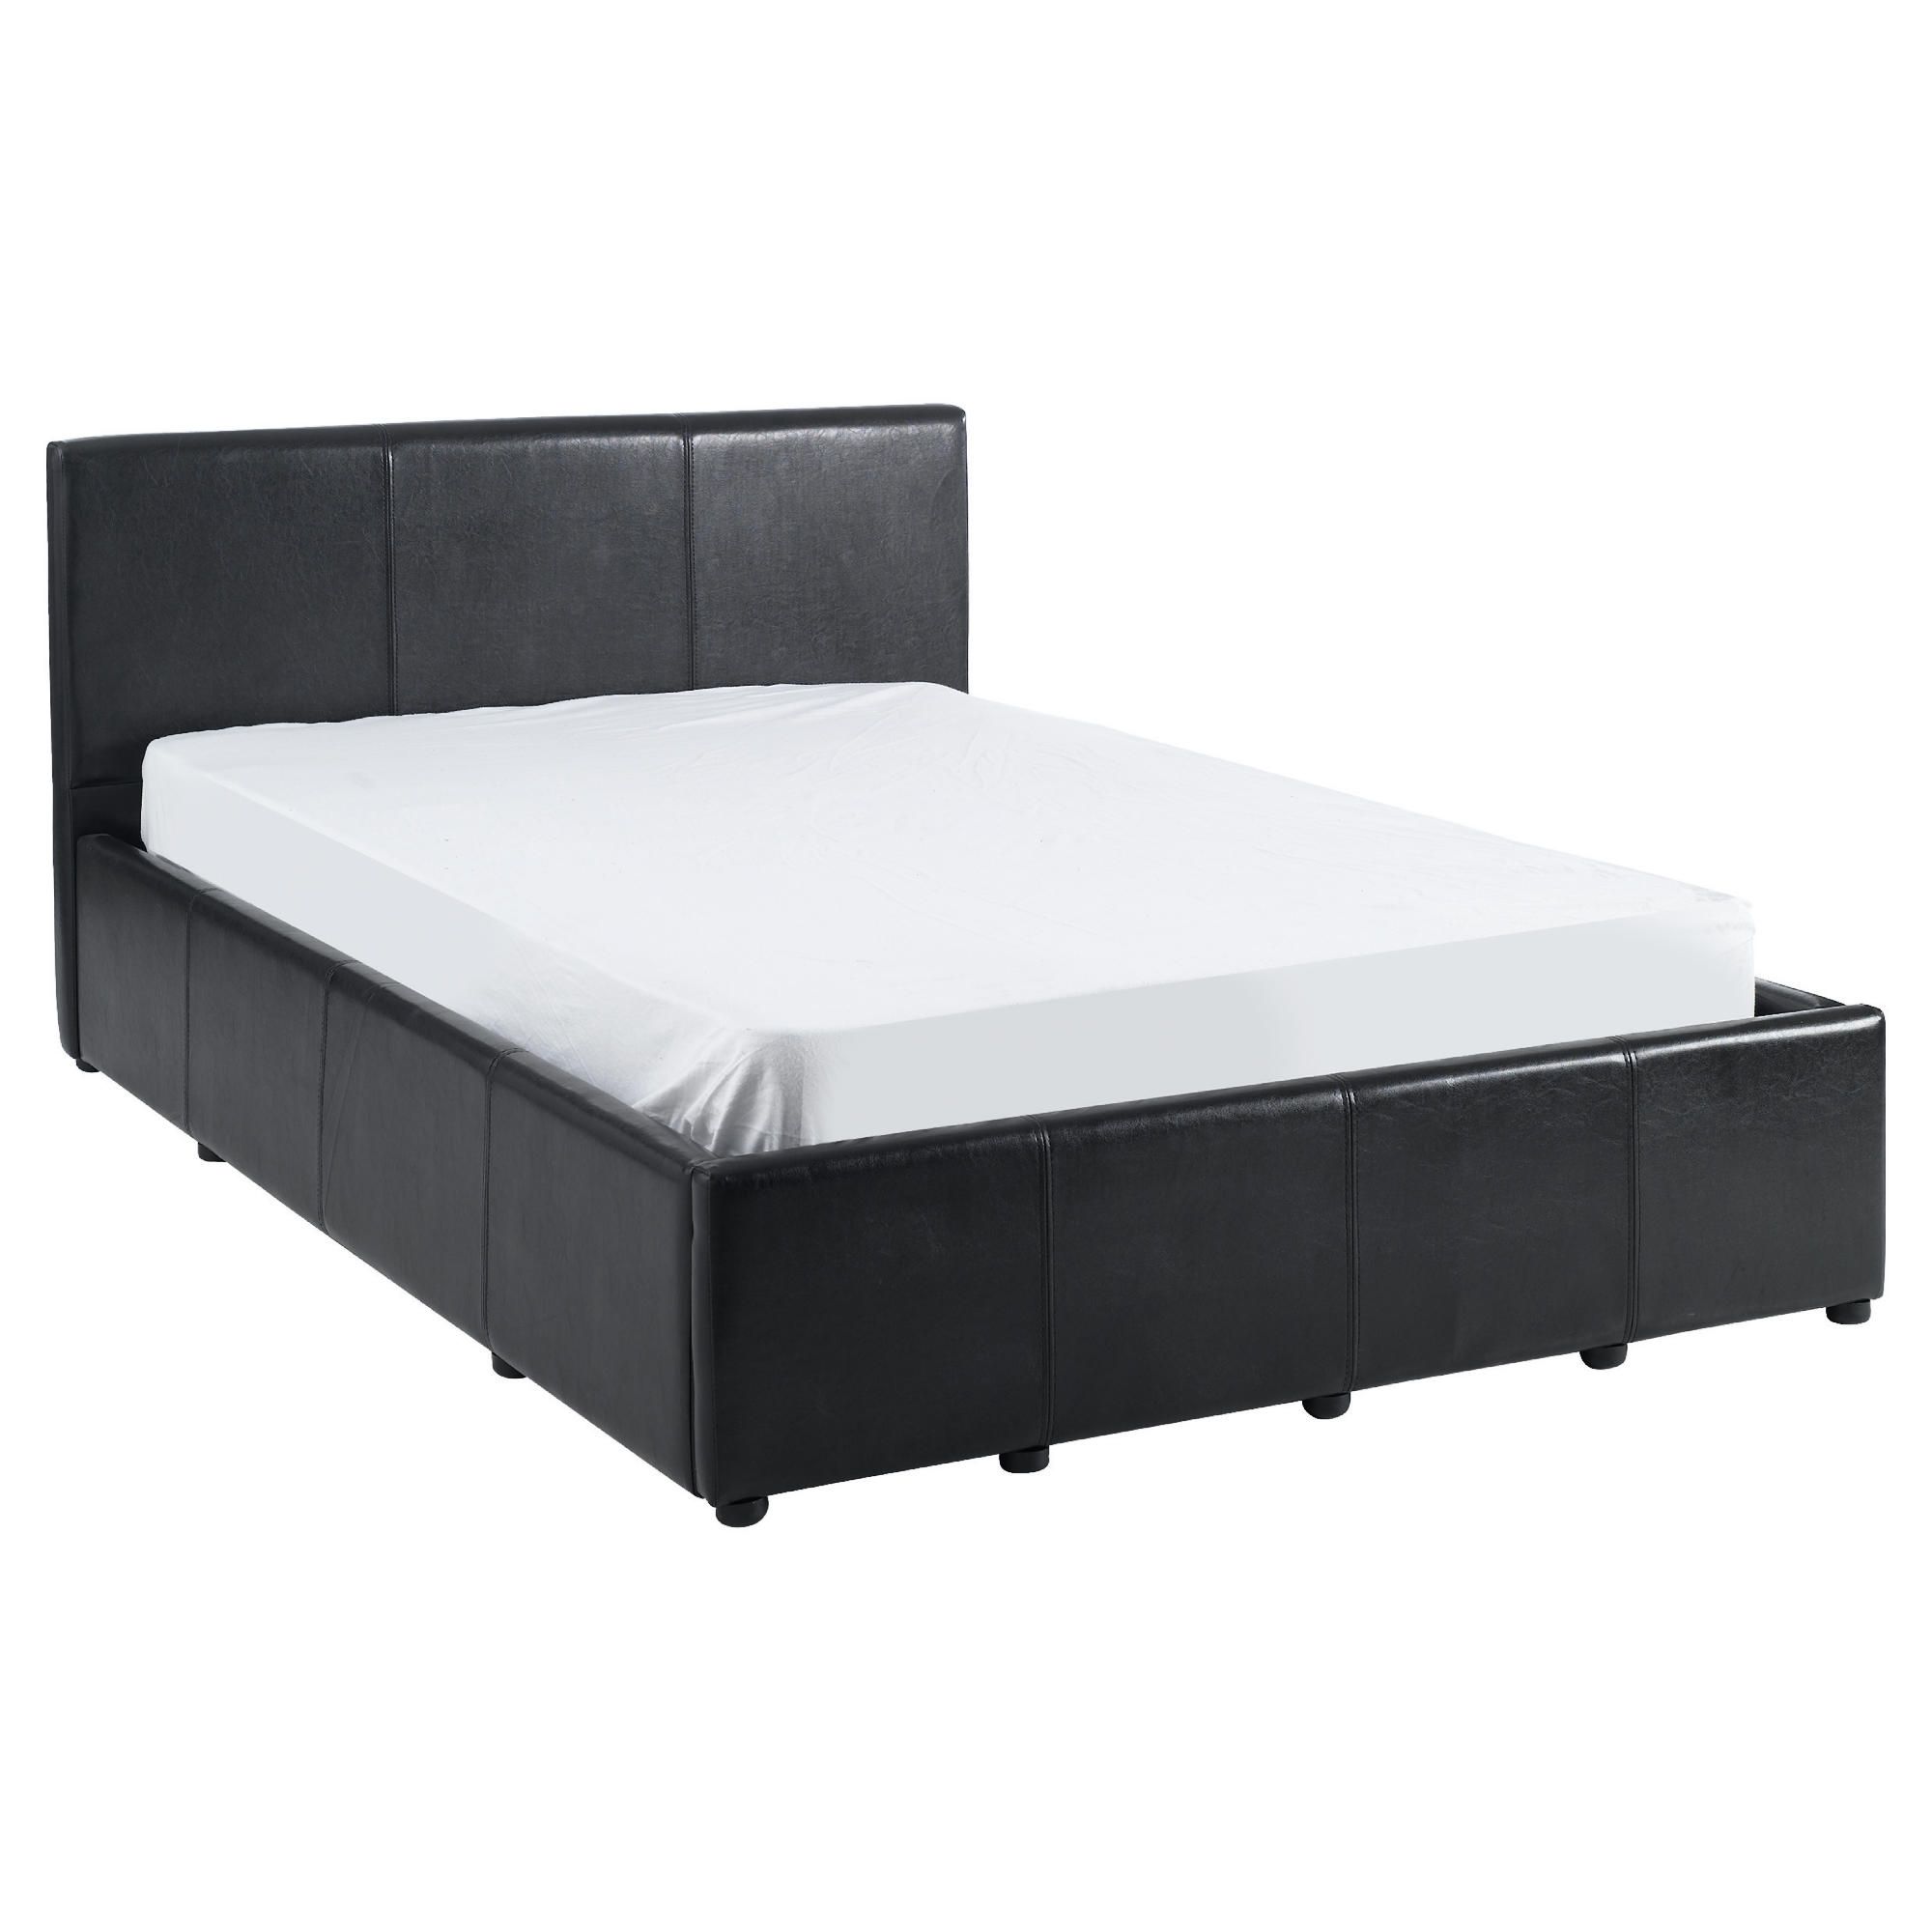 Eden Small Double Faux Leather Ottoman Bed Frame, Black at Tesco Direct